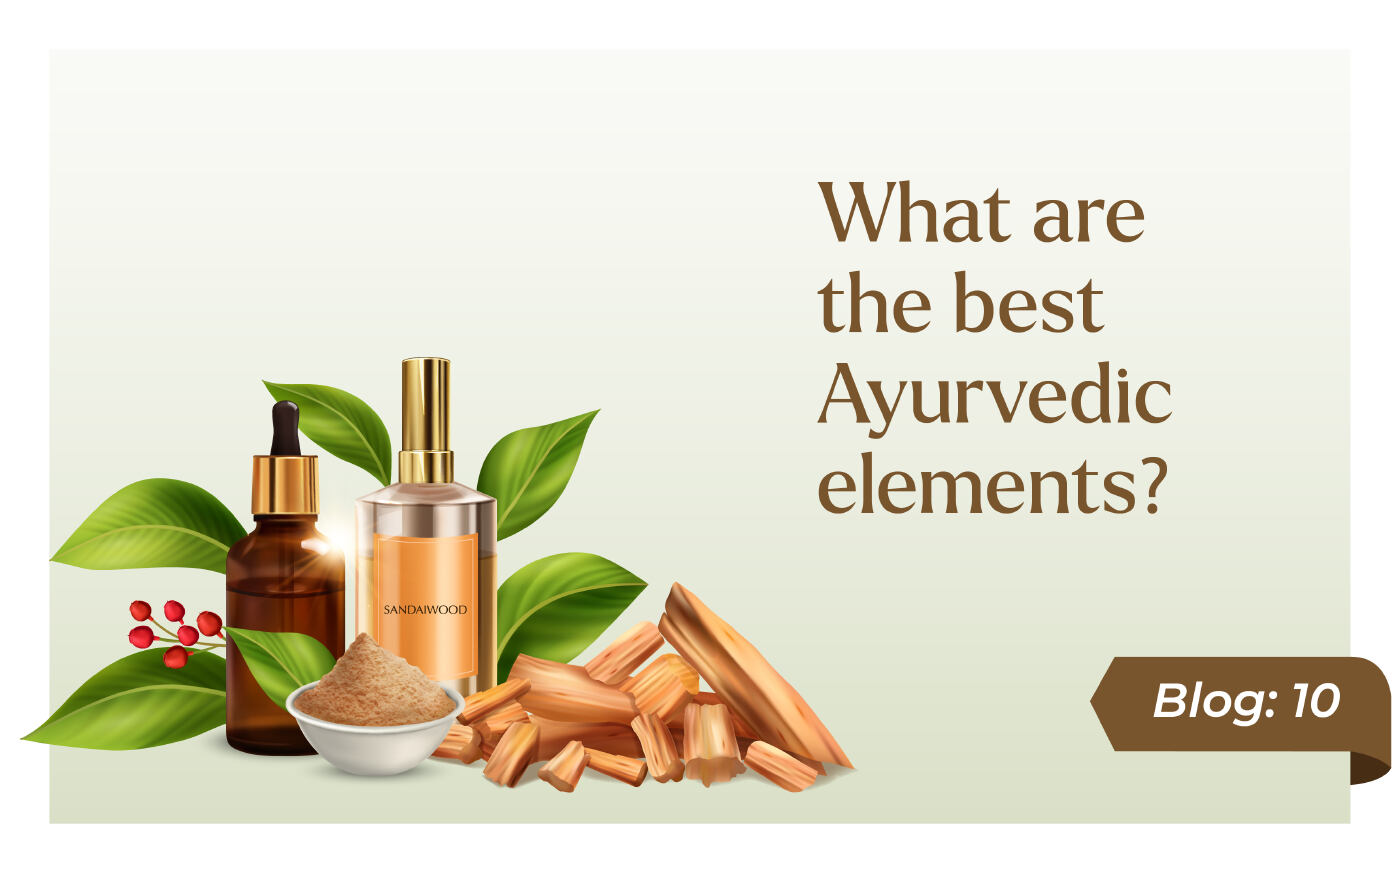 What are the best Ayurvedic elements?